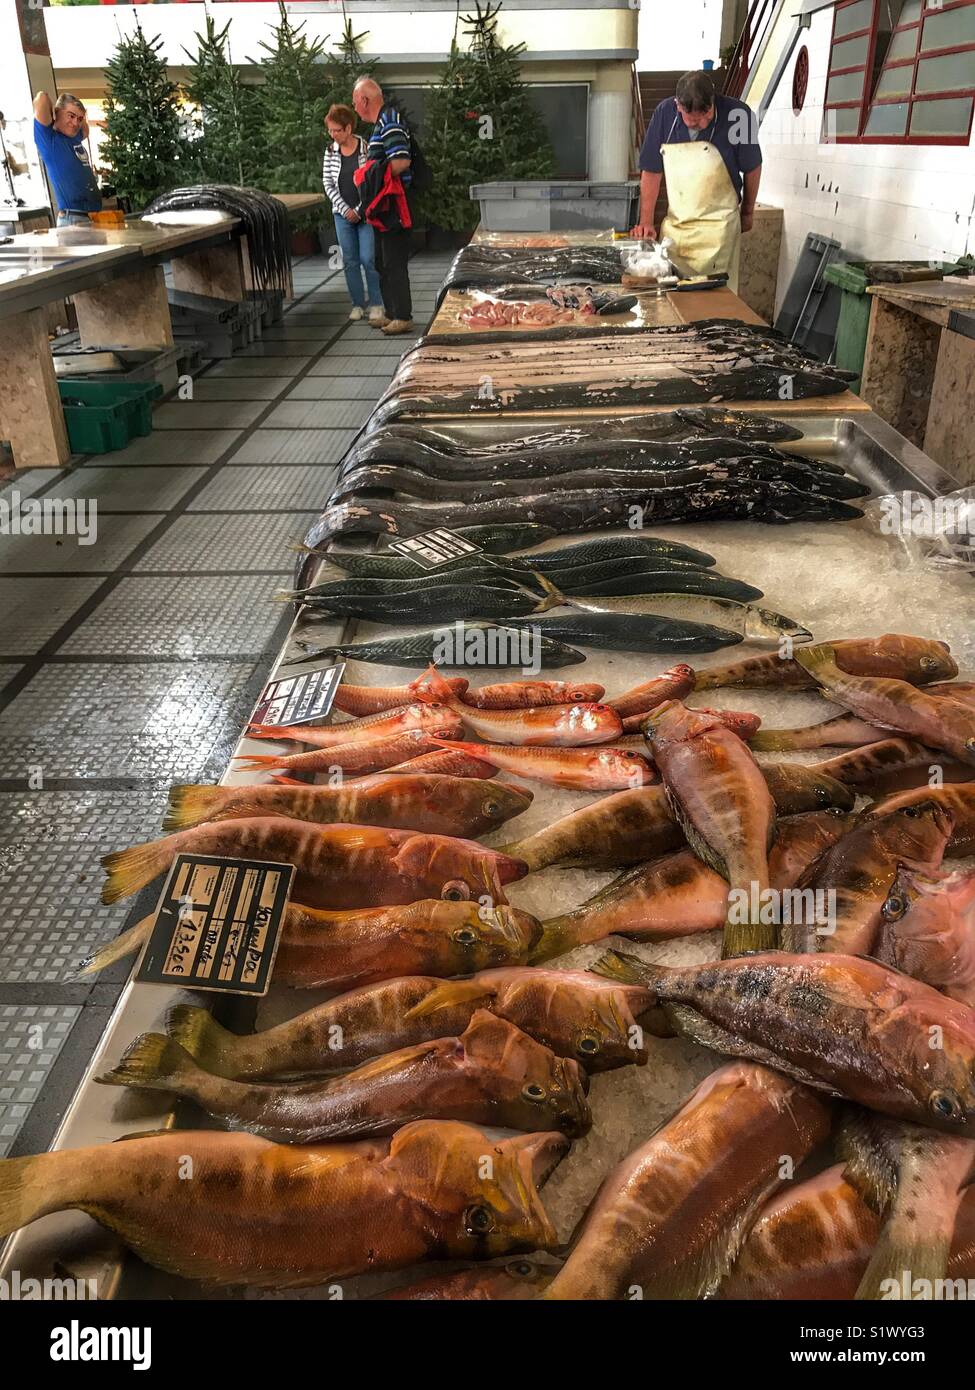 Fish counters with fish for sale, including black scabbardfish, at the fish market, Mercado dos Lavradores, Funchal, Madeira, Portugal Stock Photo